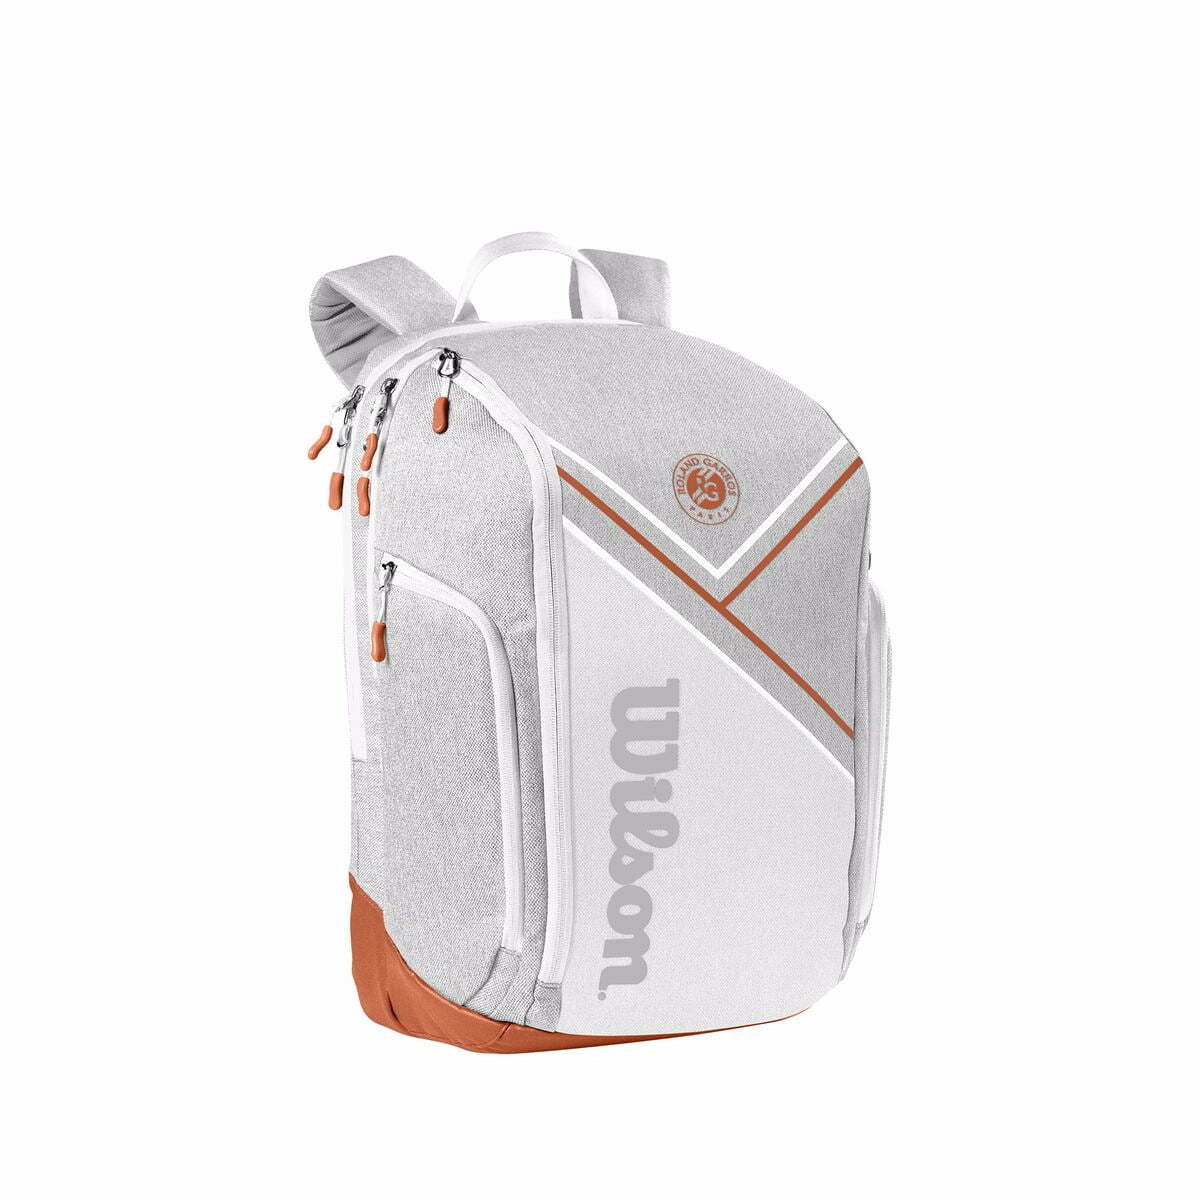 Wr8018302 0 Roland Garros Super Tour Backpack Clay Wh.png.high Res 1200x1200